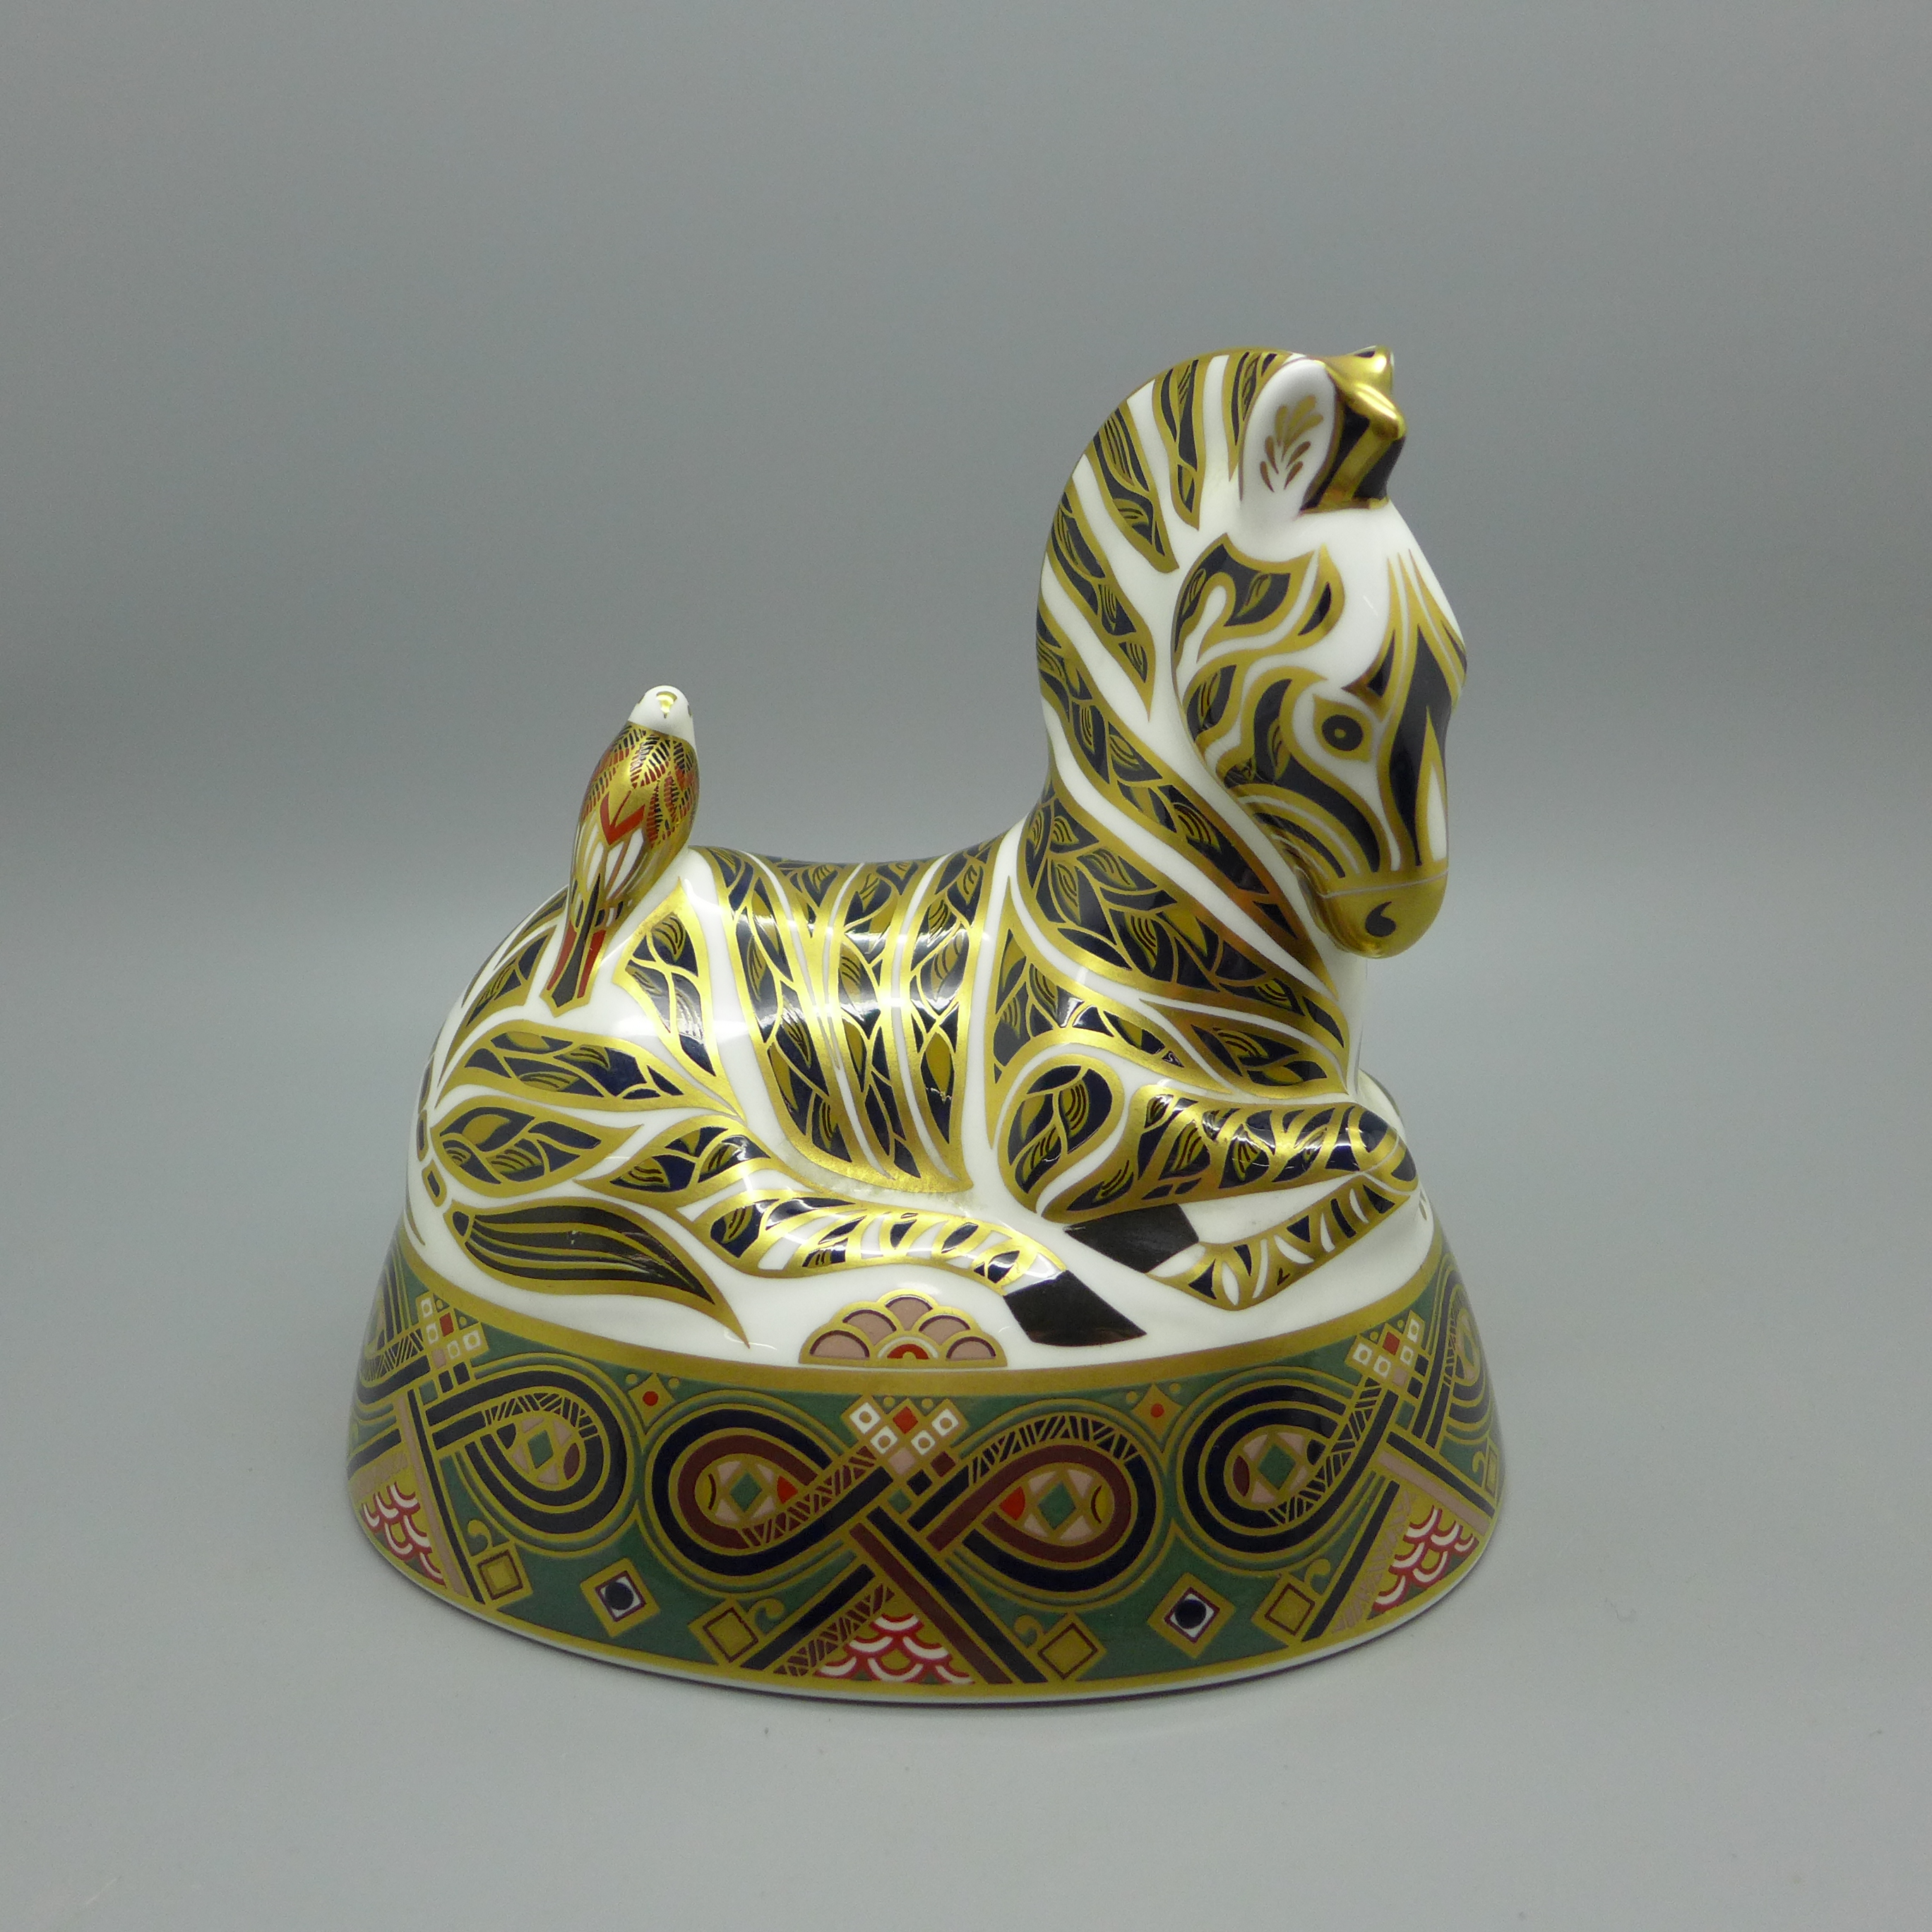 A Royal Crown Derby Zebra paperweight with gold stopper and original box